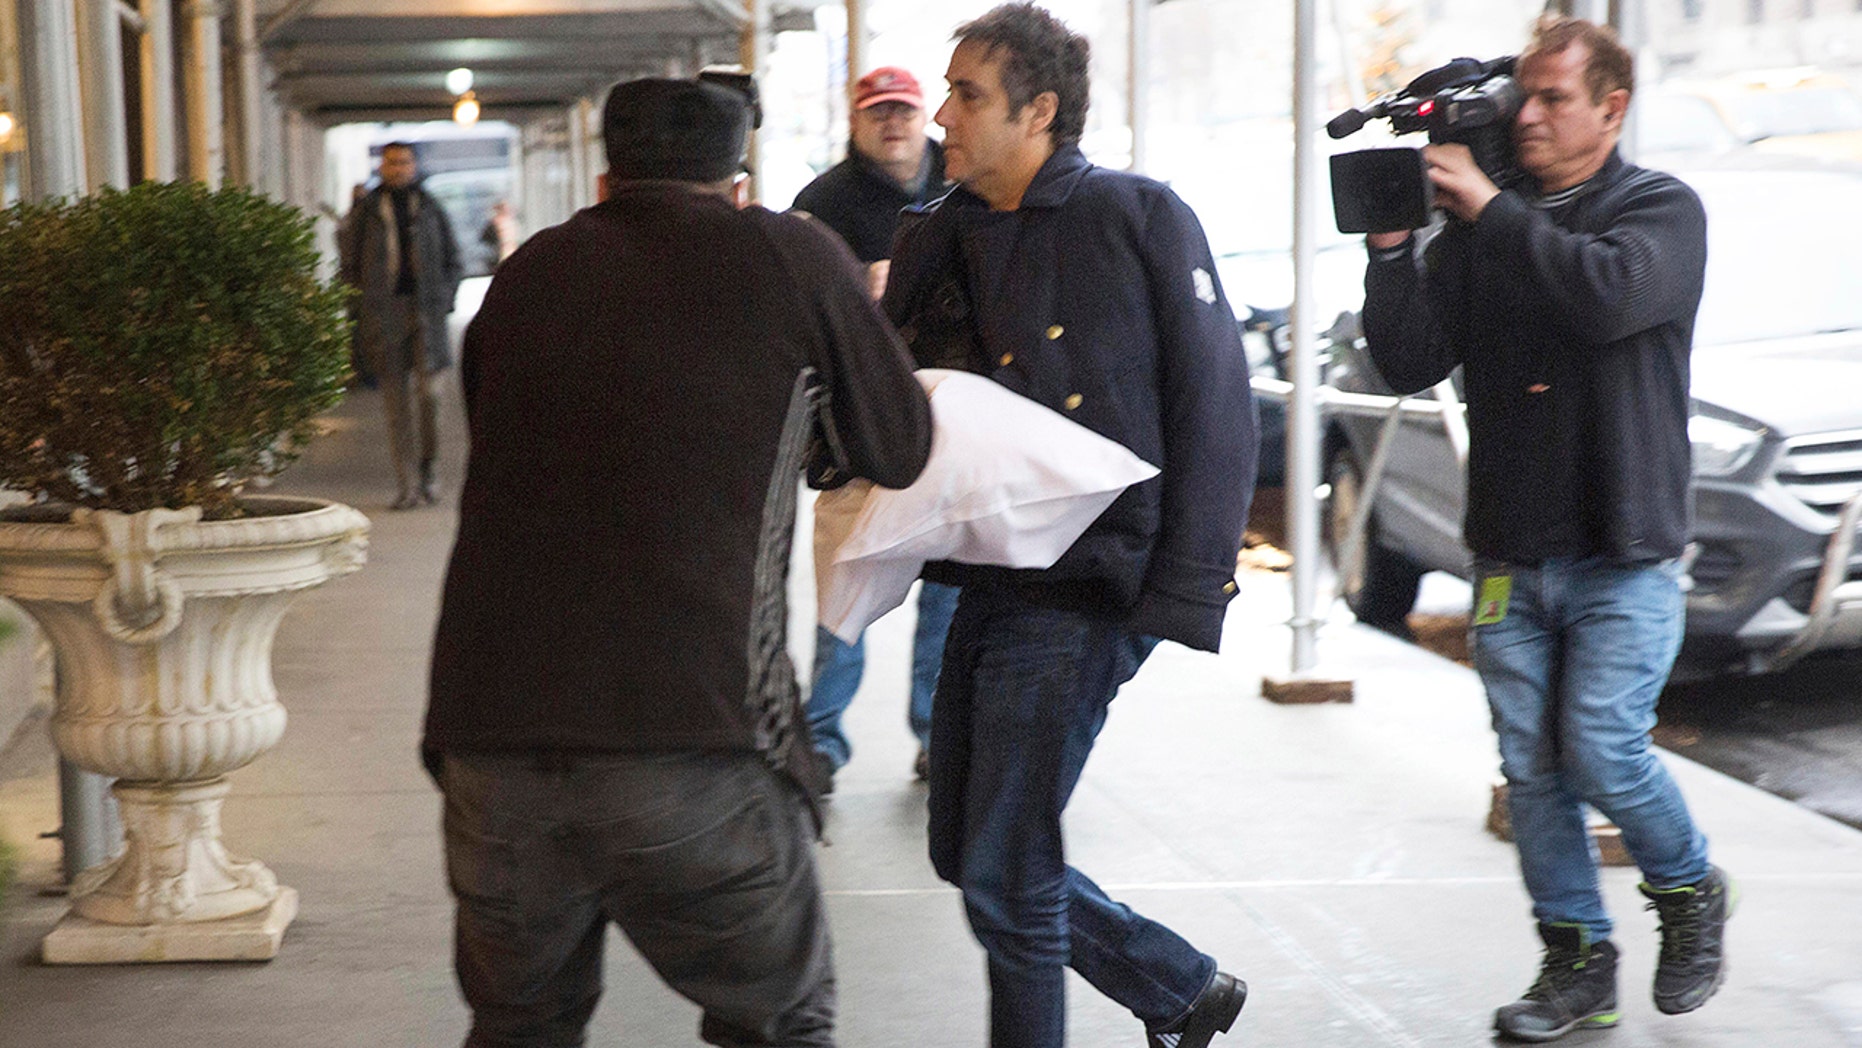 Cohen spotted with arm in sling, setting off speculation